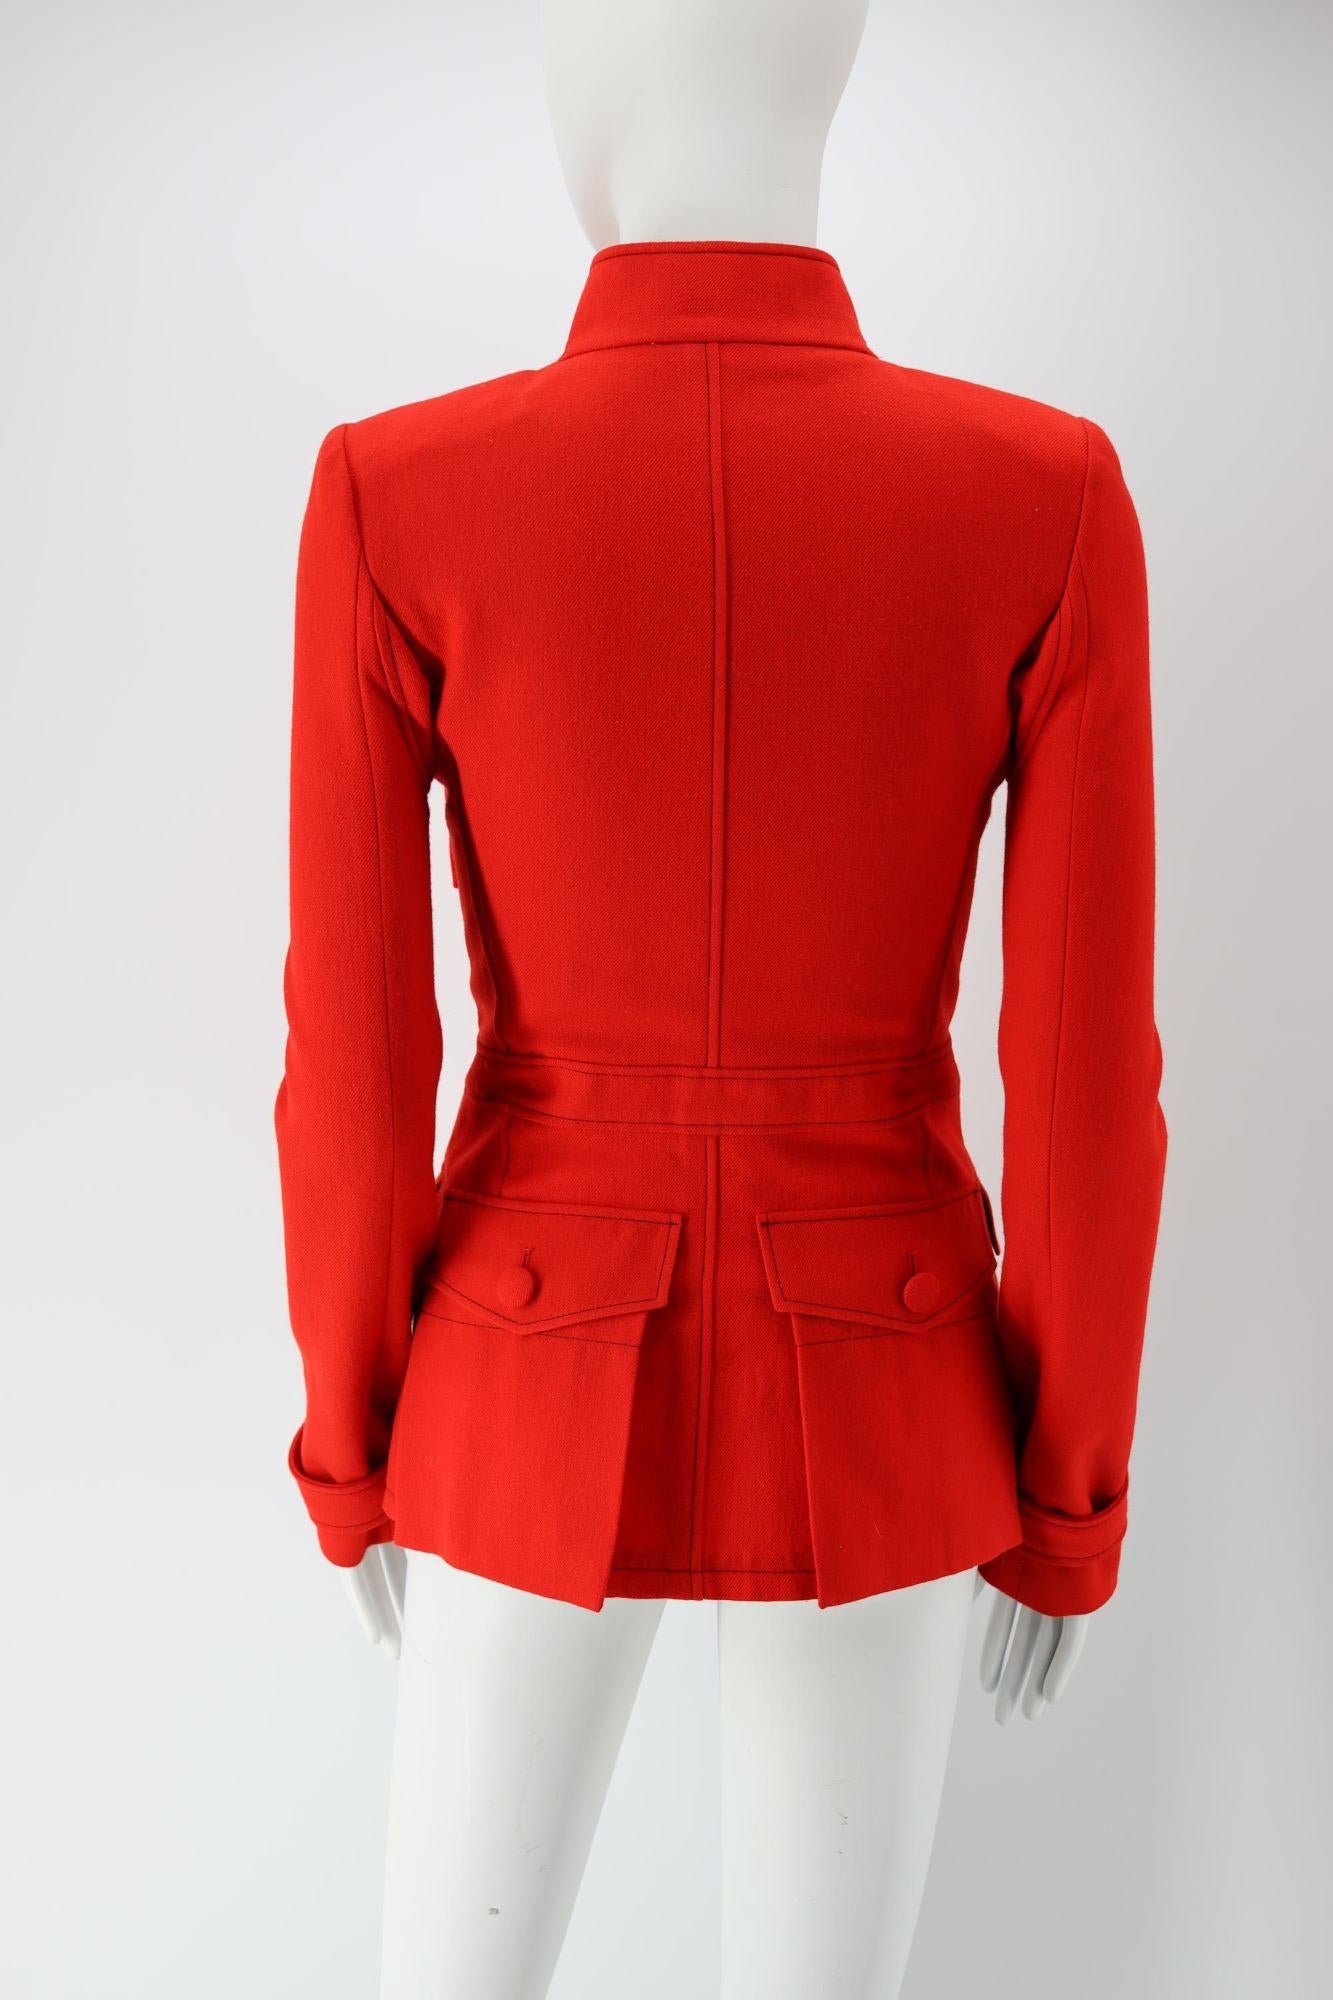 

- Balenciaga by Nicolas Ghesquiere
- Wool jacket in a bright red
- Pockets at the back and front
- Straps around the wrist
- Mao collar
- Excellent condition, shows some light signs of use and wear but nothing visible

- Shoulders: 36 cm / Bust: